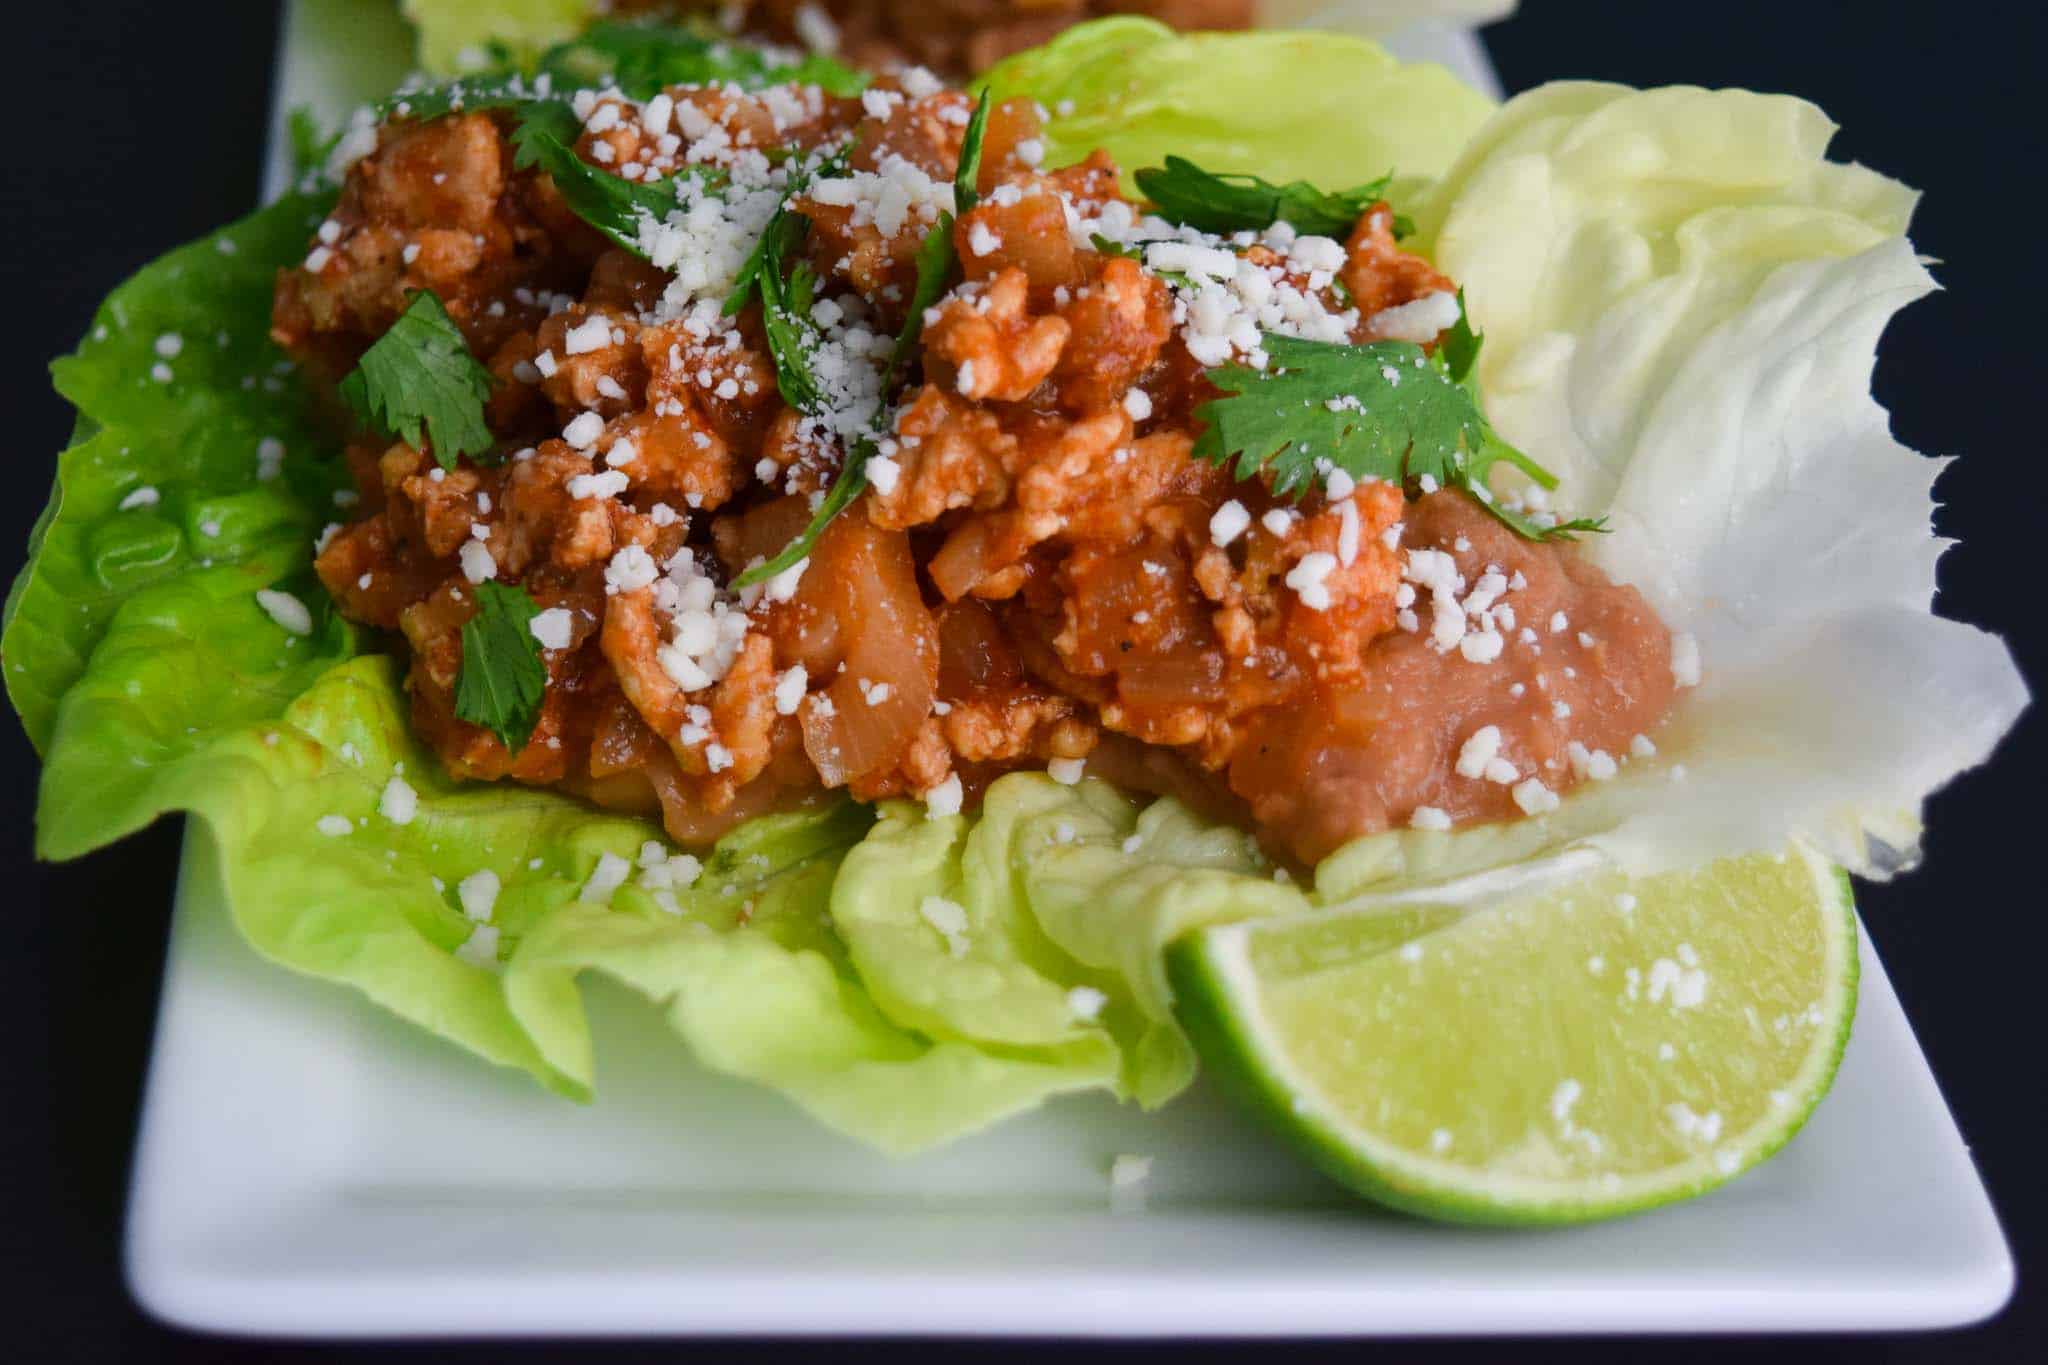 Chicken Taco in Lettuce Wraps on white platter close up view